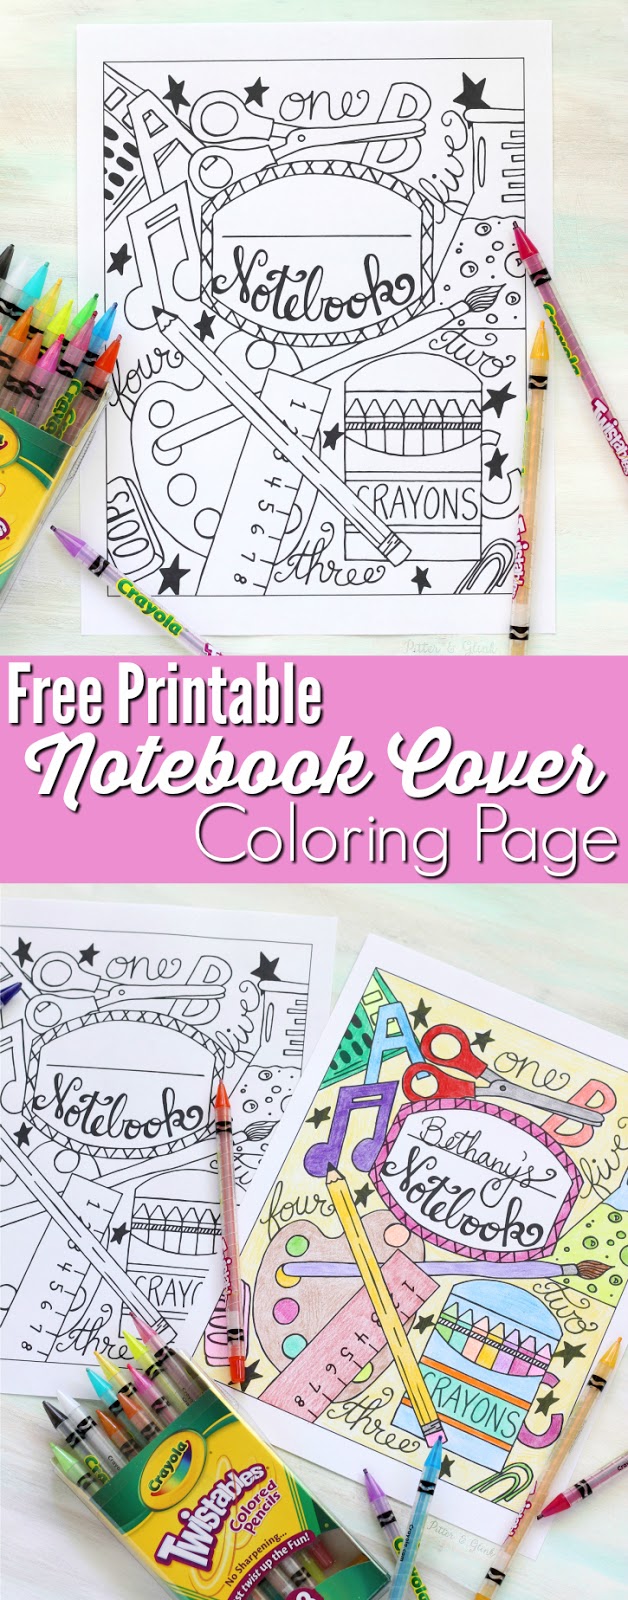 Download Back to School Notebook Cover Printable Coloring Page - The Crafting Chicks